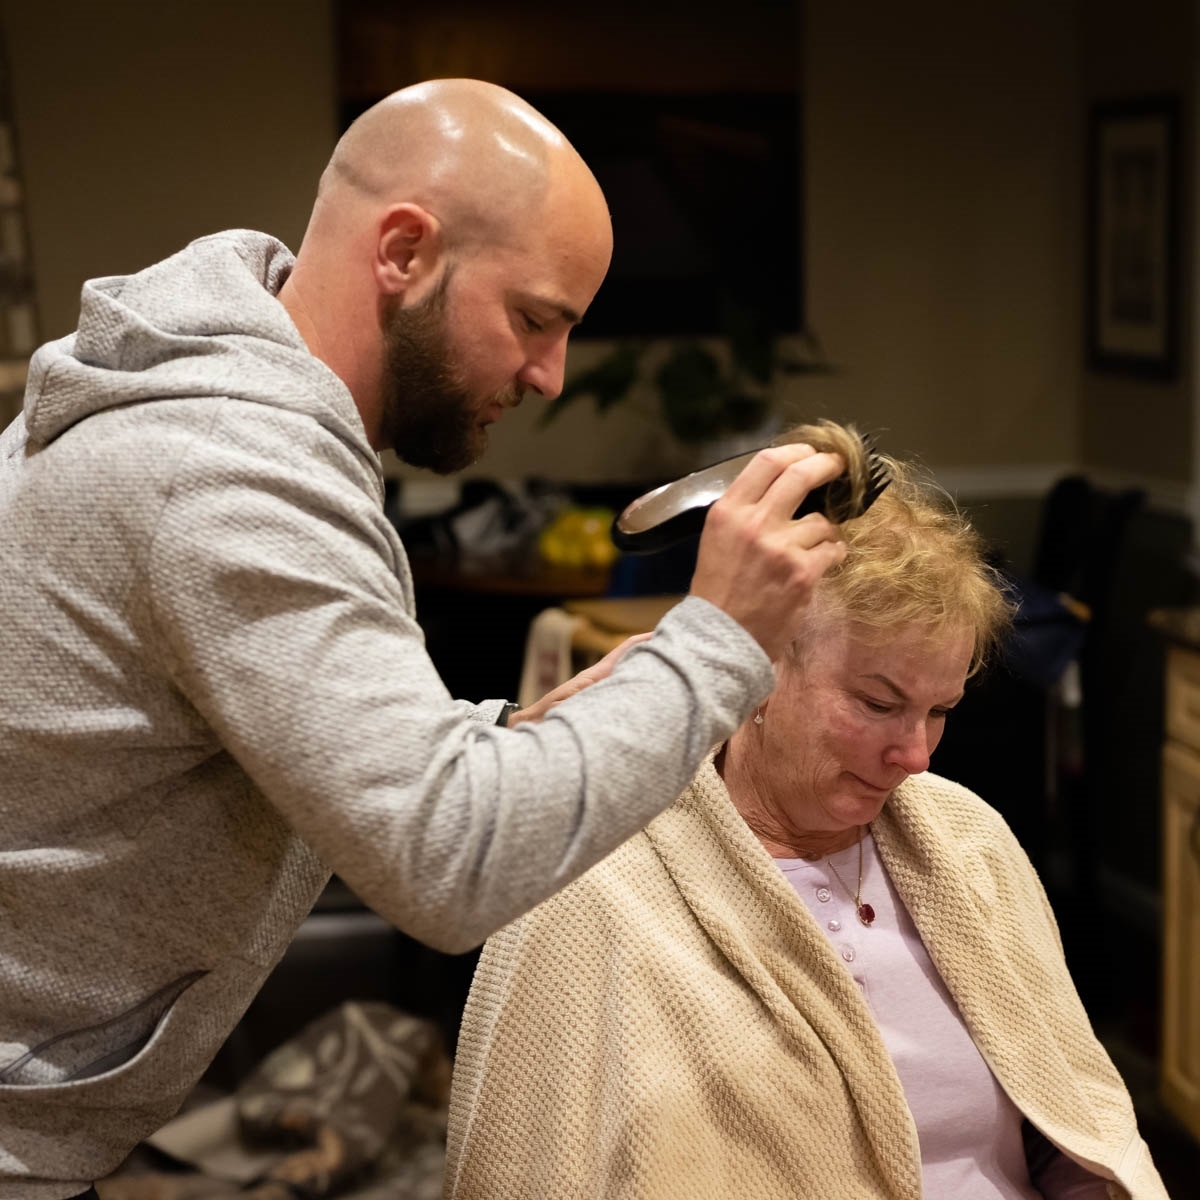 Haircut-2-As-the-haircut-begins-reality-sets-in-and-the-fear-and-emotions-of-this-moment-in-her-life-begin-to-show.-JM-Place-by-Michael-Funk-SR